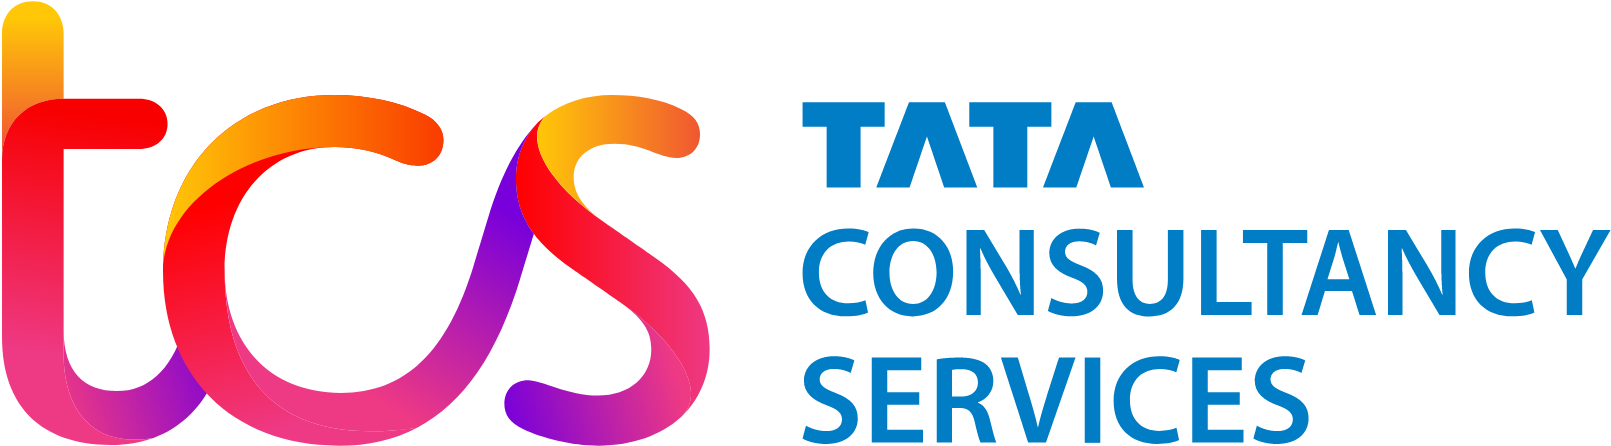 Tata Consultancy Services logo large (transparent PNG)